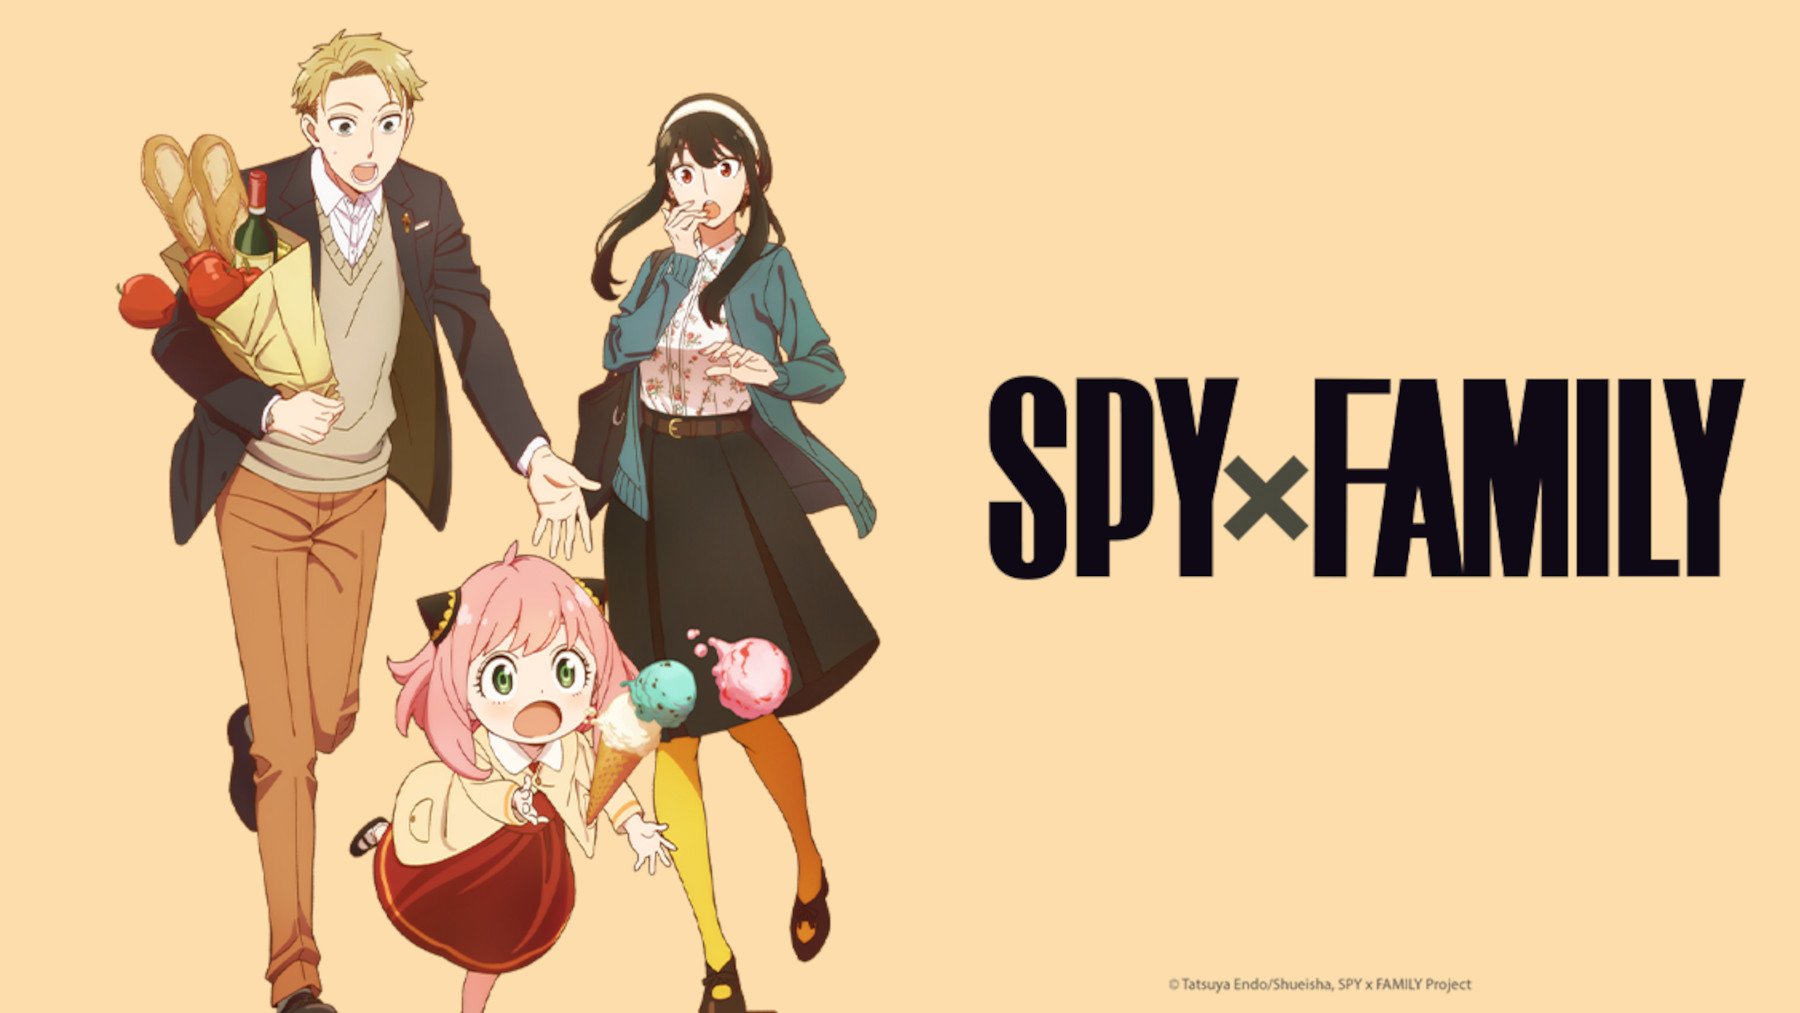 10 things to look forward to in Spy X Family season 2